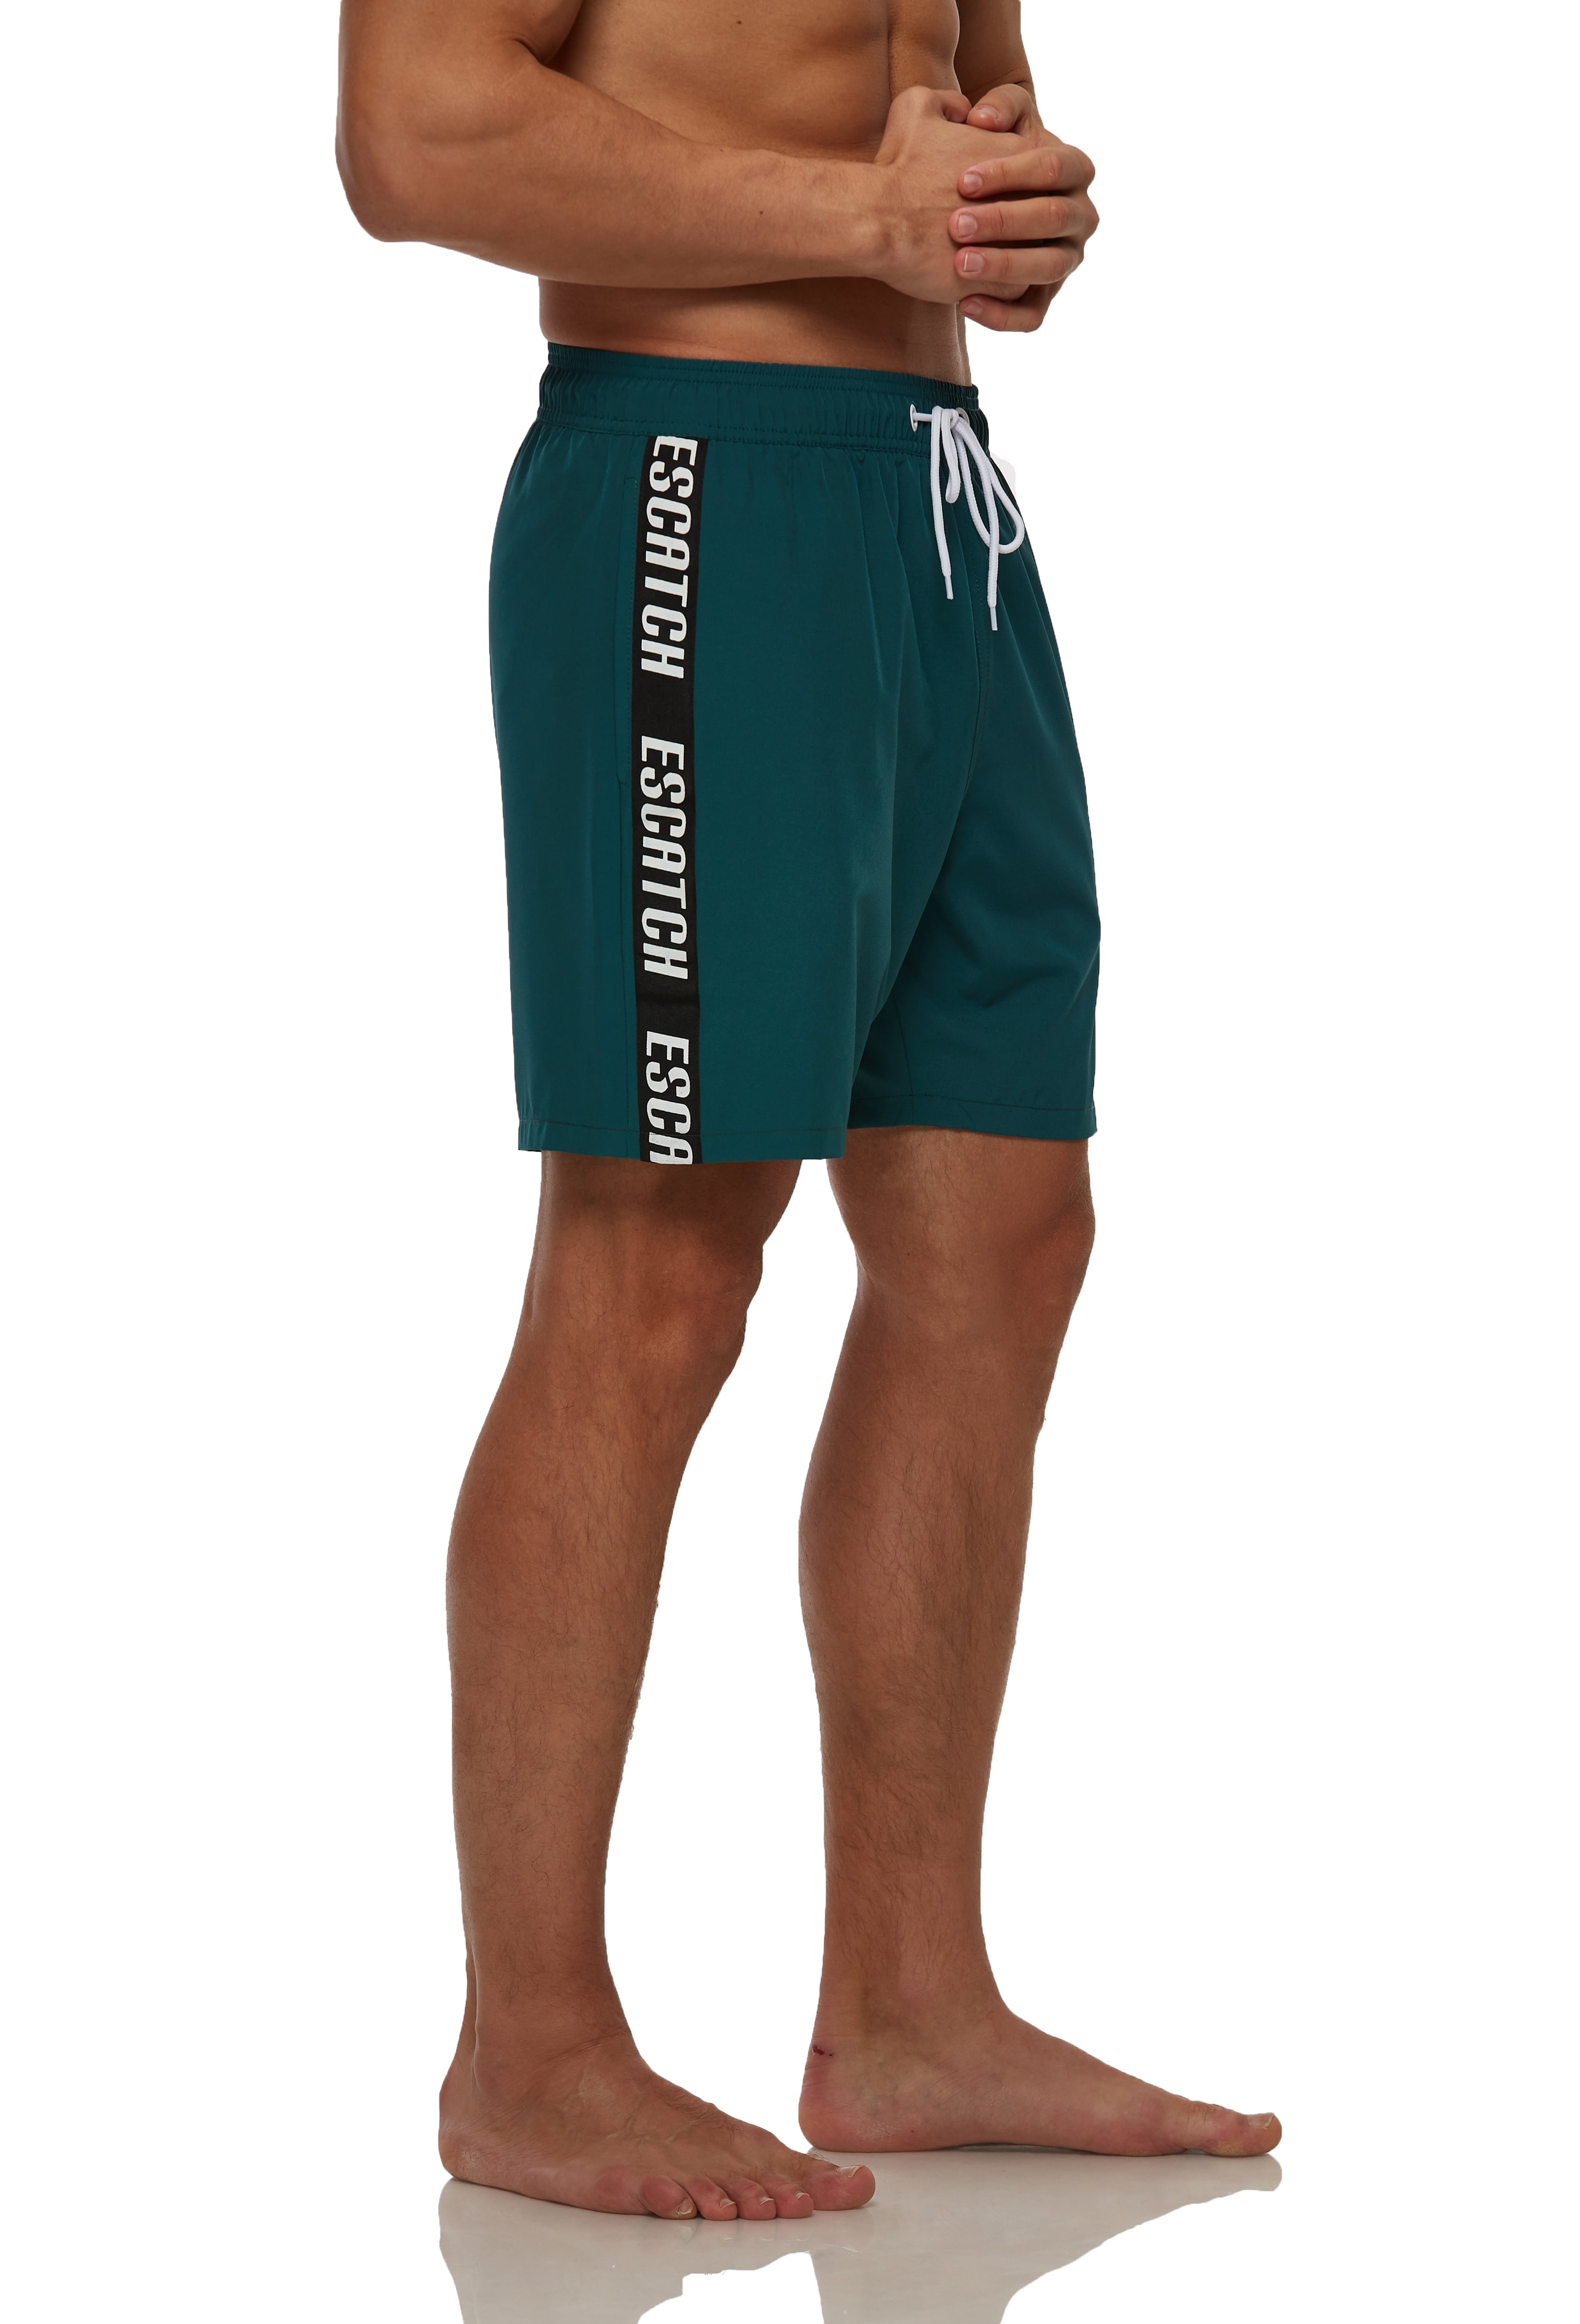 Men's Swim Trunks Quick Dry Beach Shorts with Zipper Pockets and Mesh  Lining 